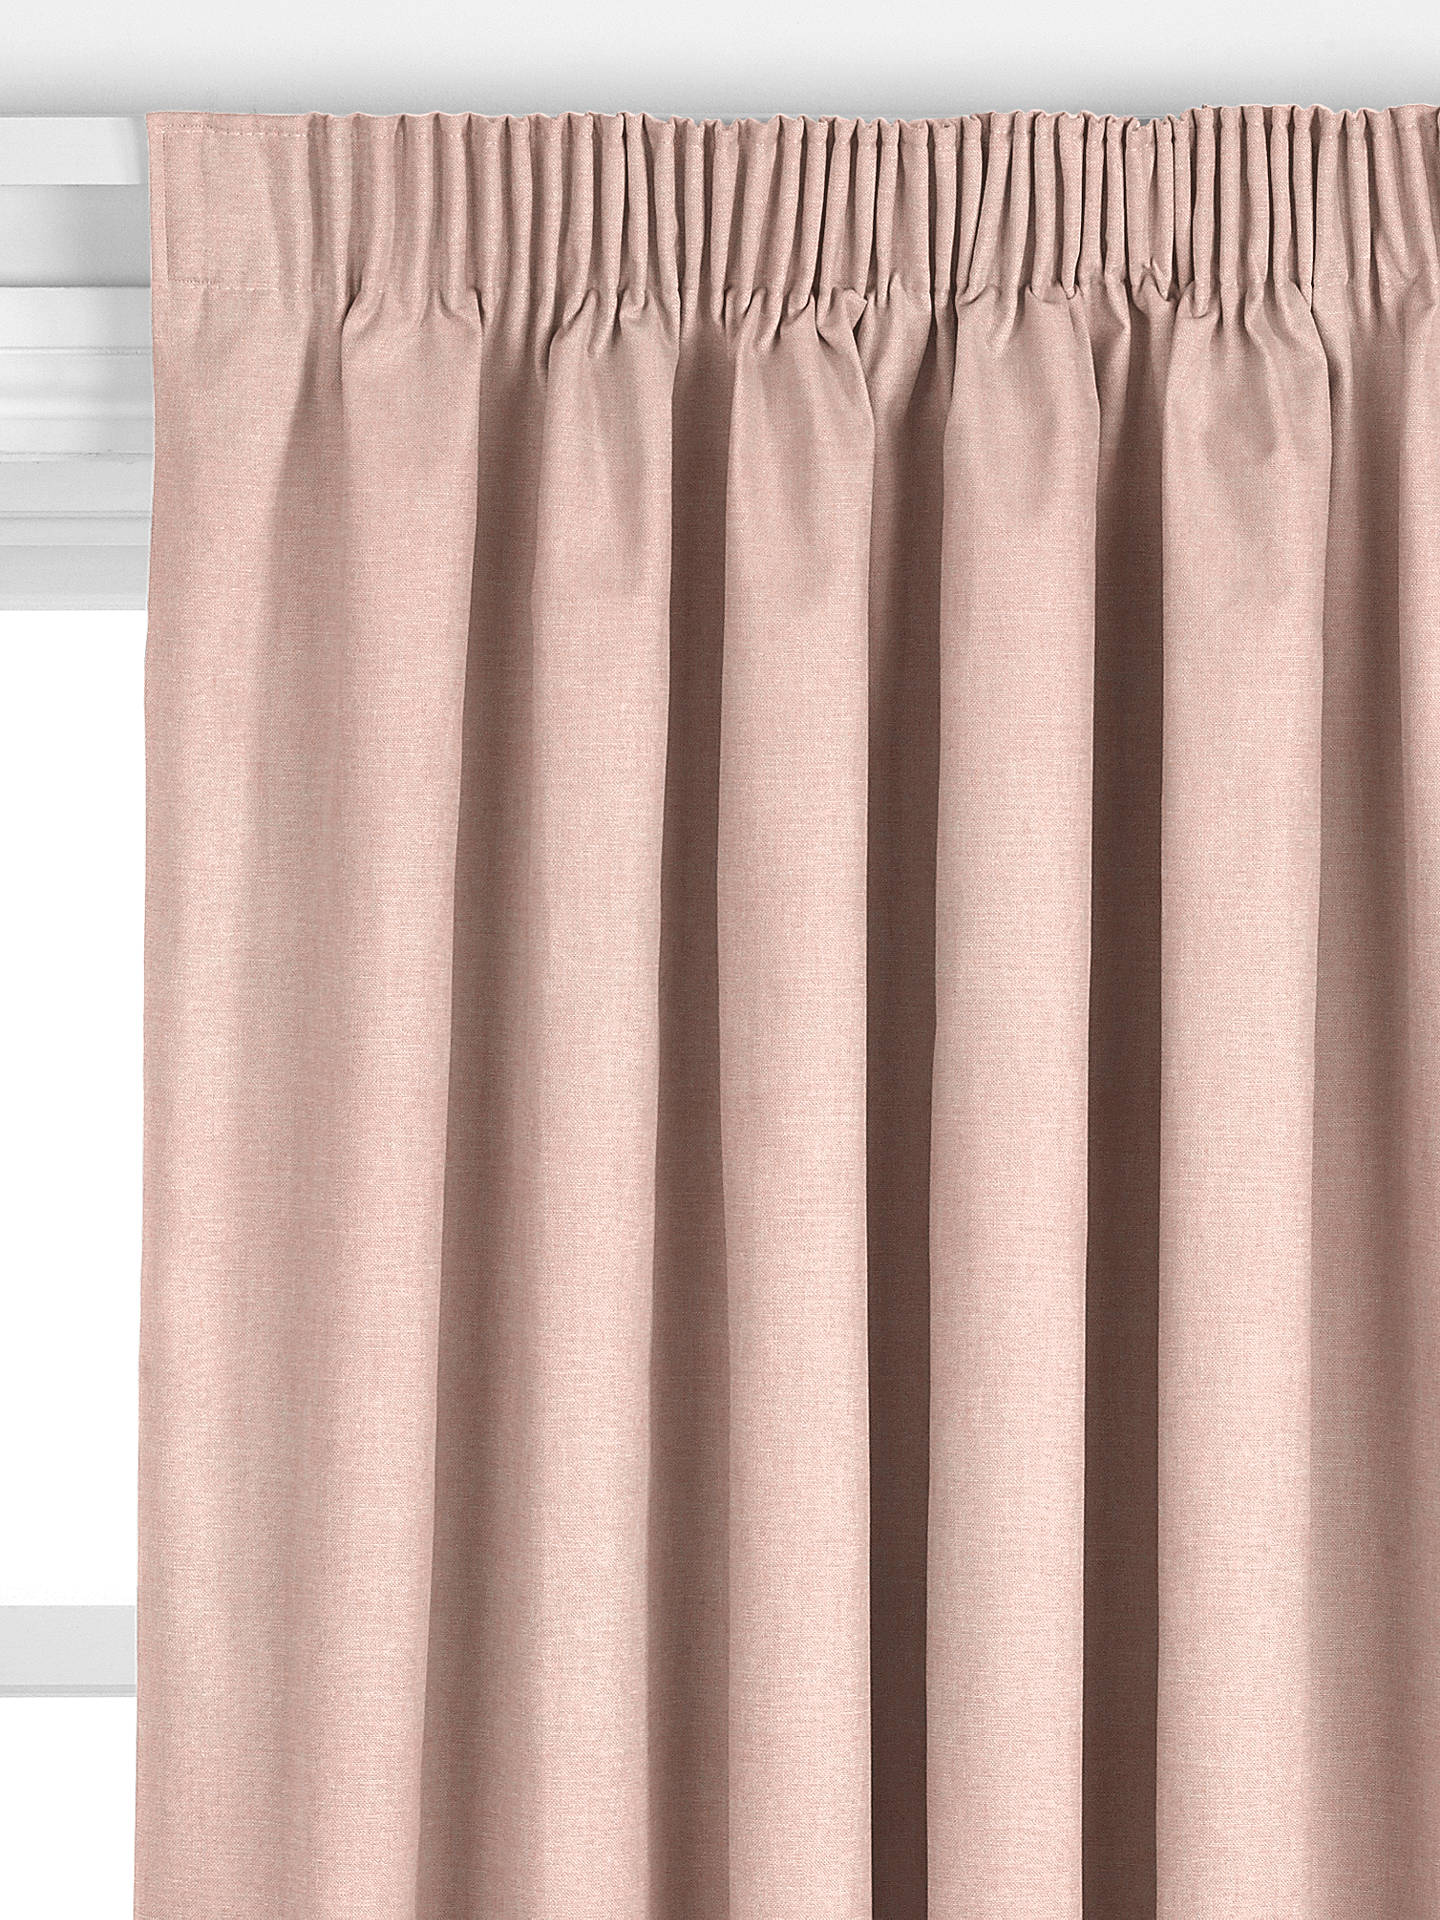 John Lewis Linen Look Made to Measure Curtains, Plaster